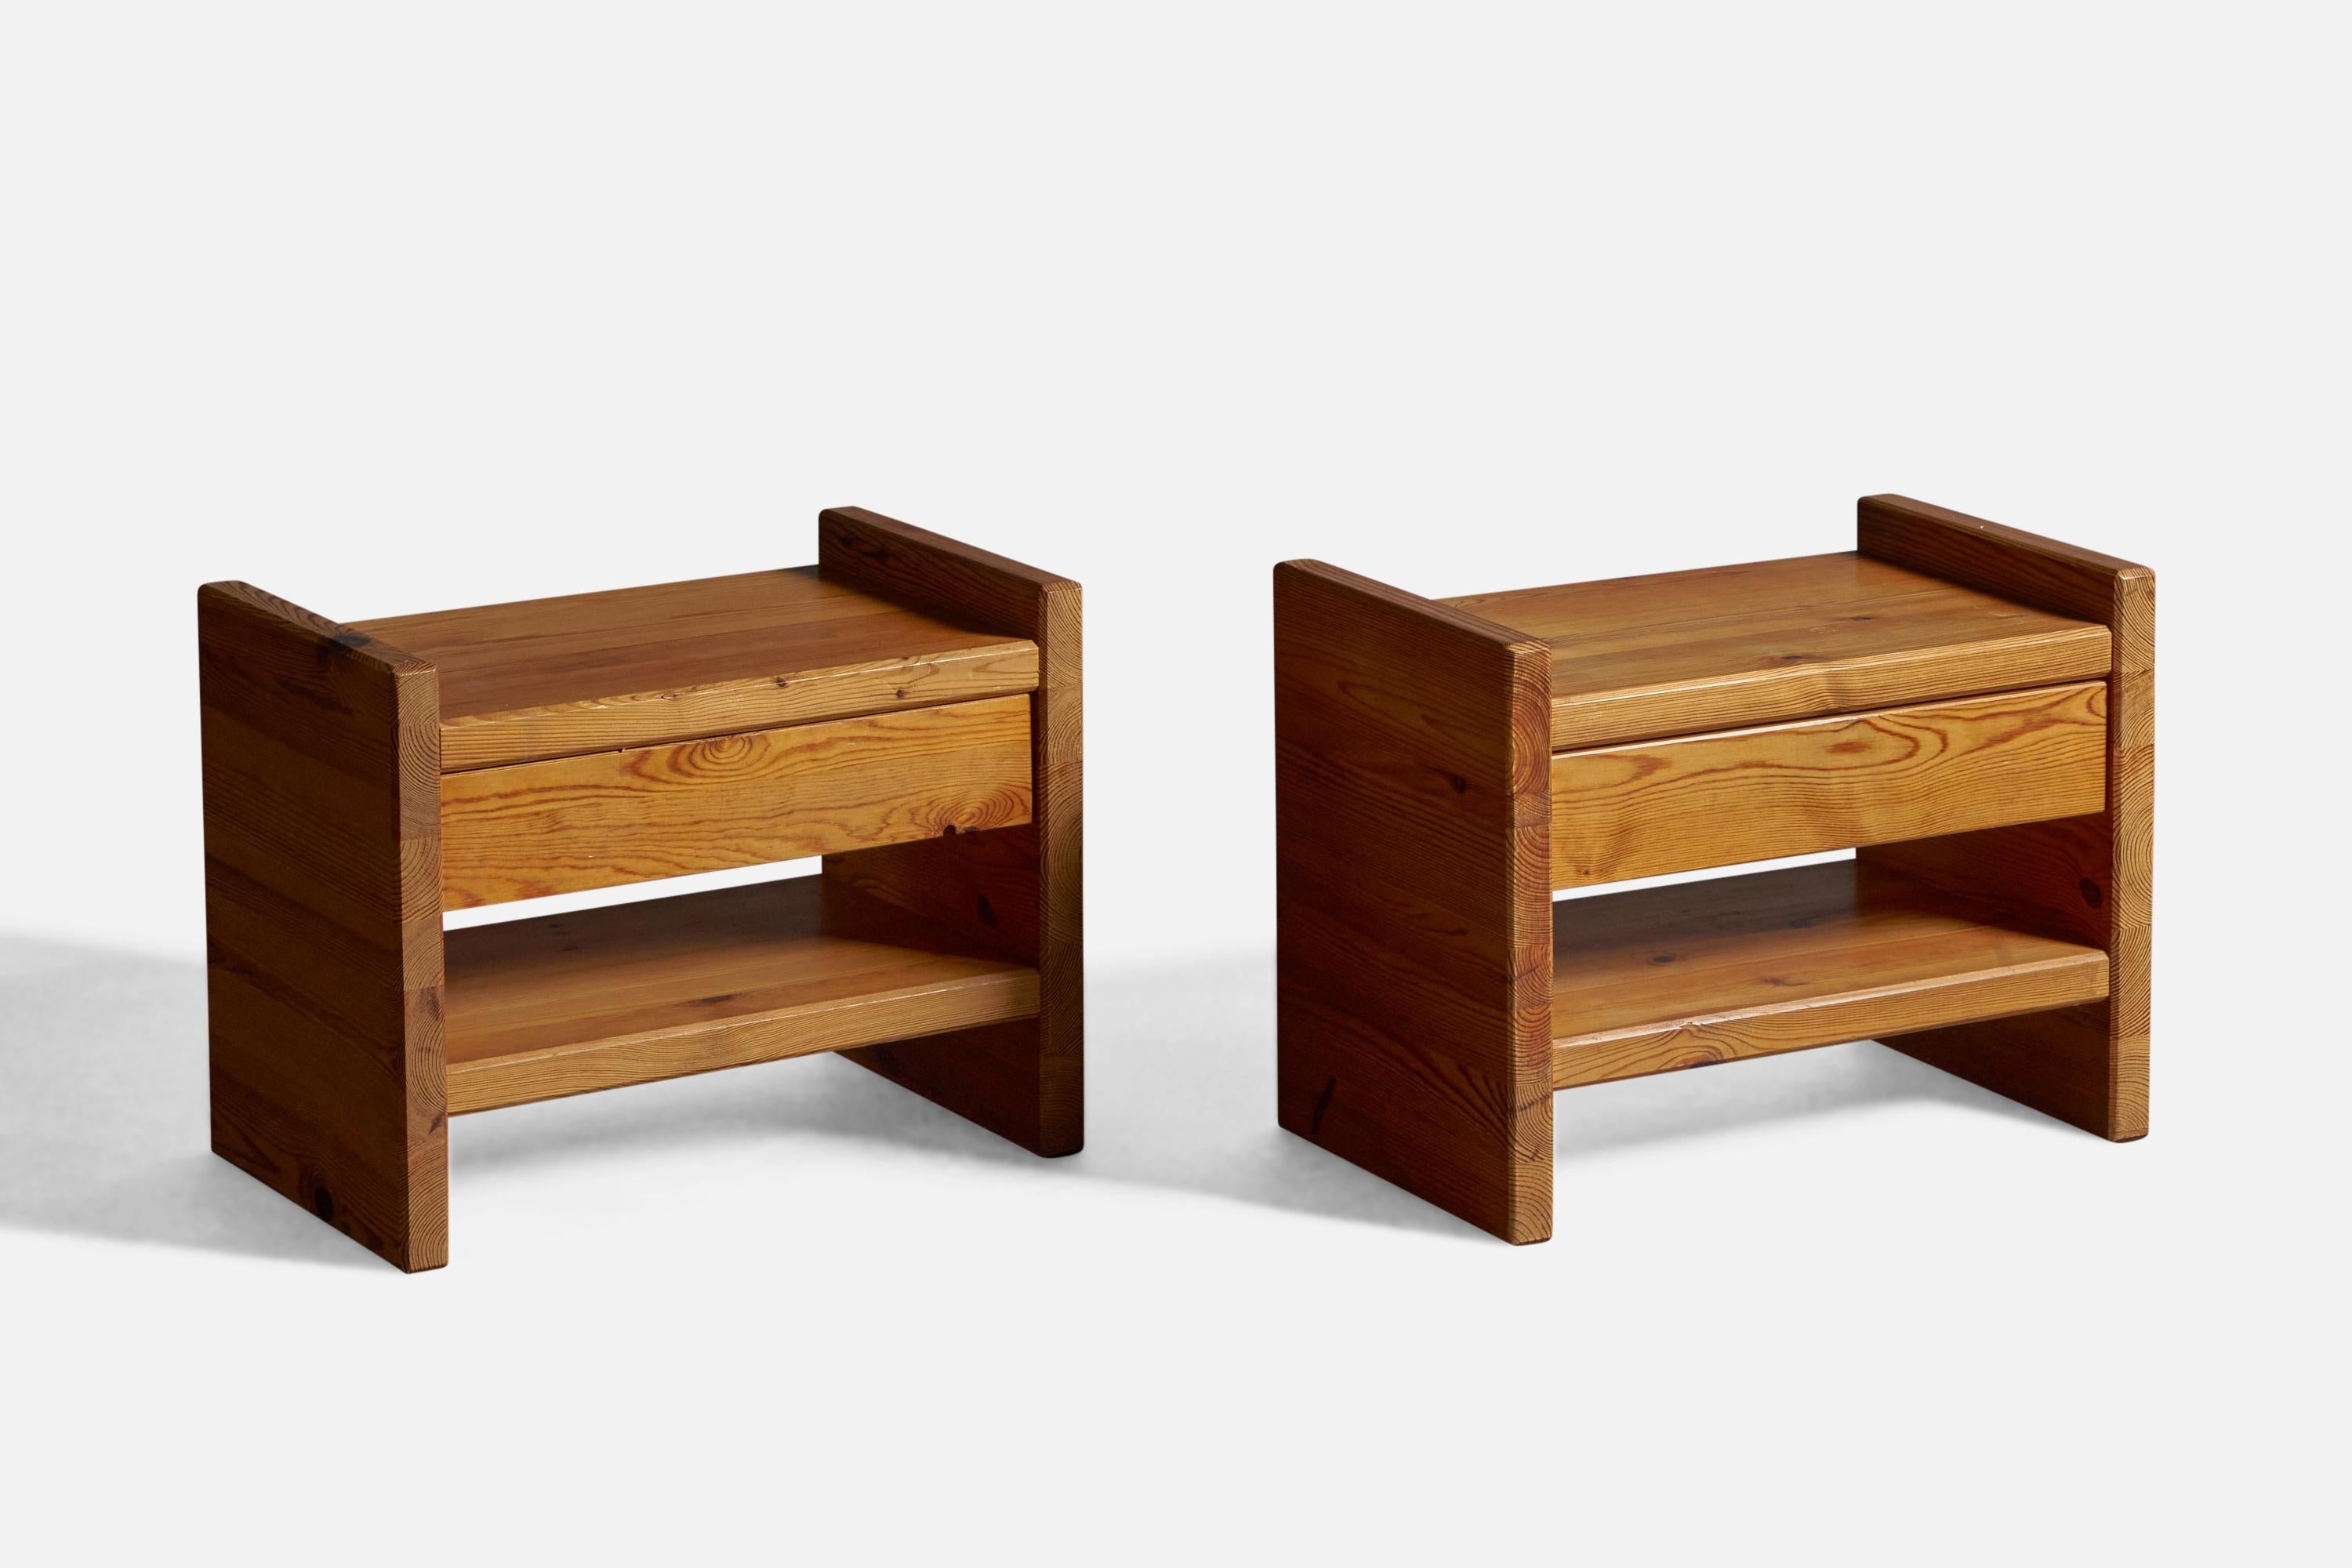 A pair of solid pine nightstands or bedside cabinets, designed and produced in Sweden, 1970s.